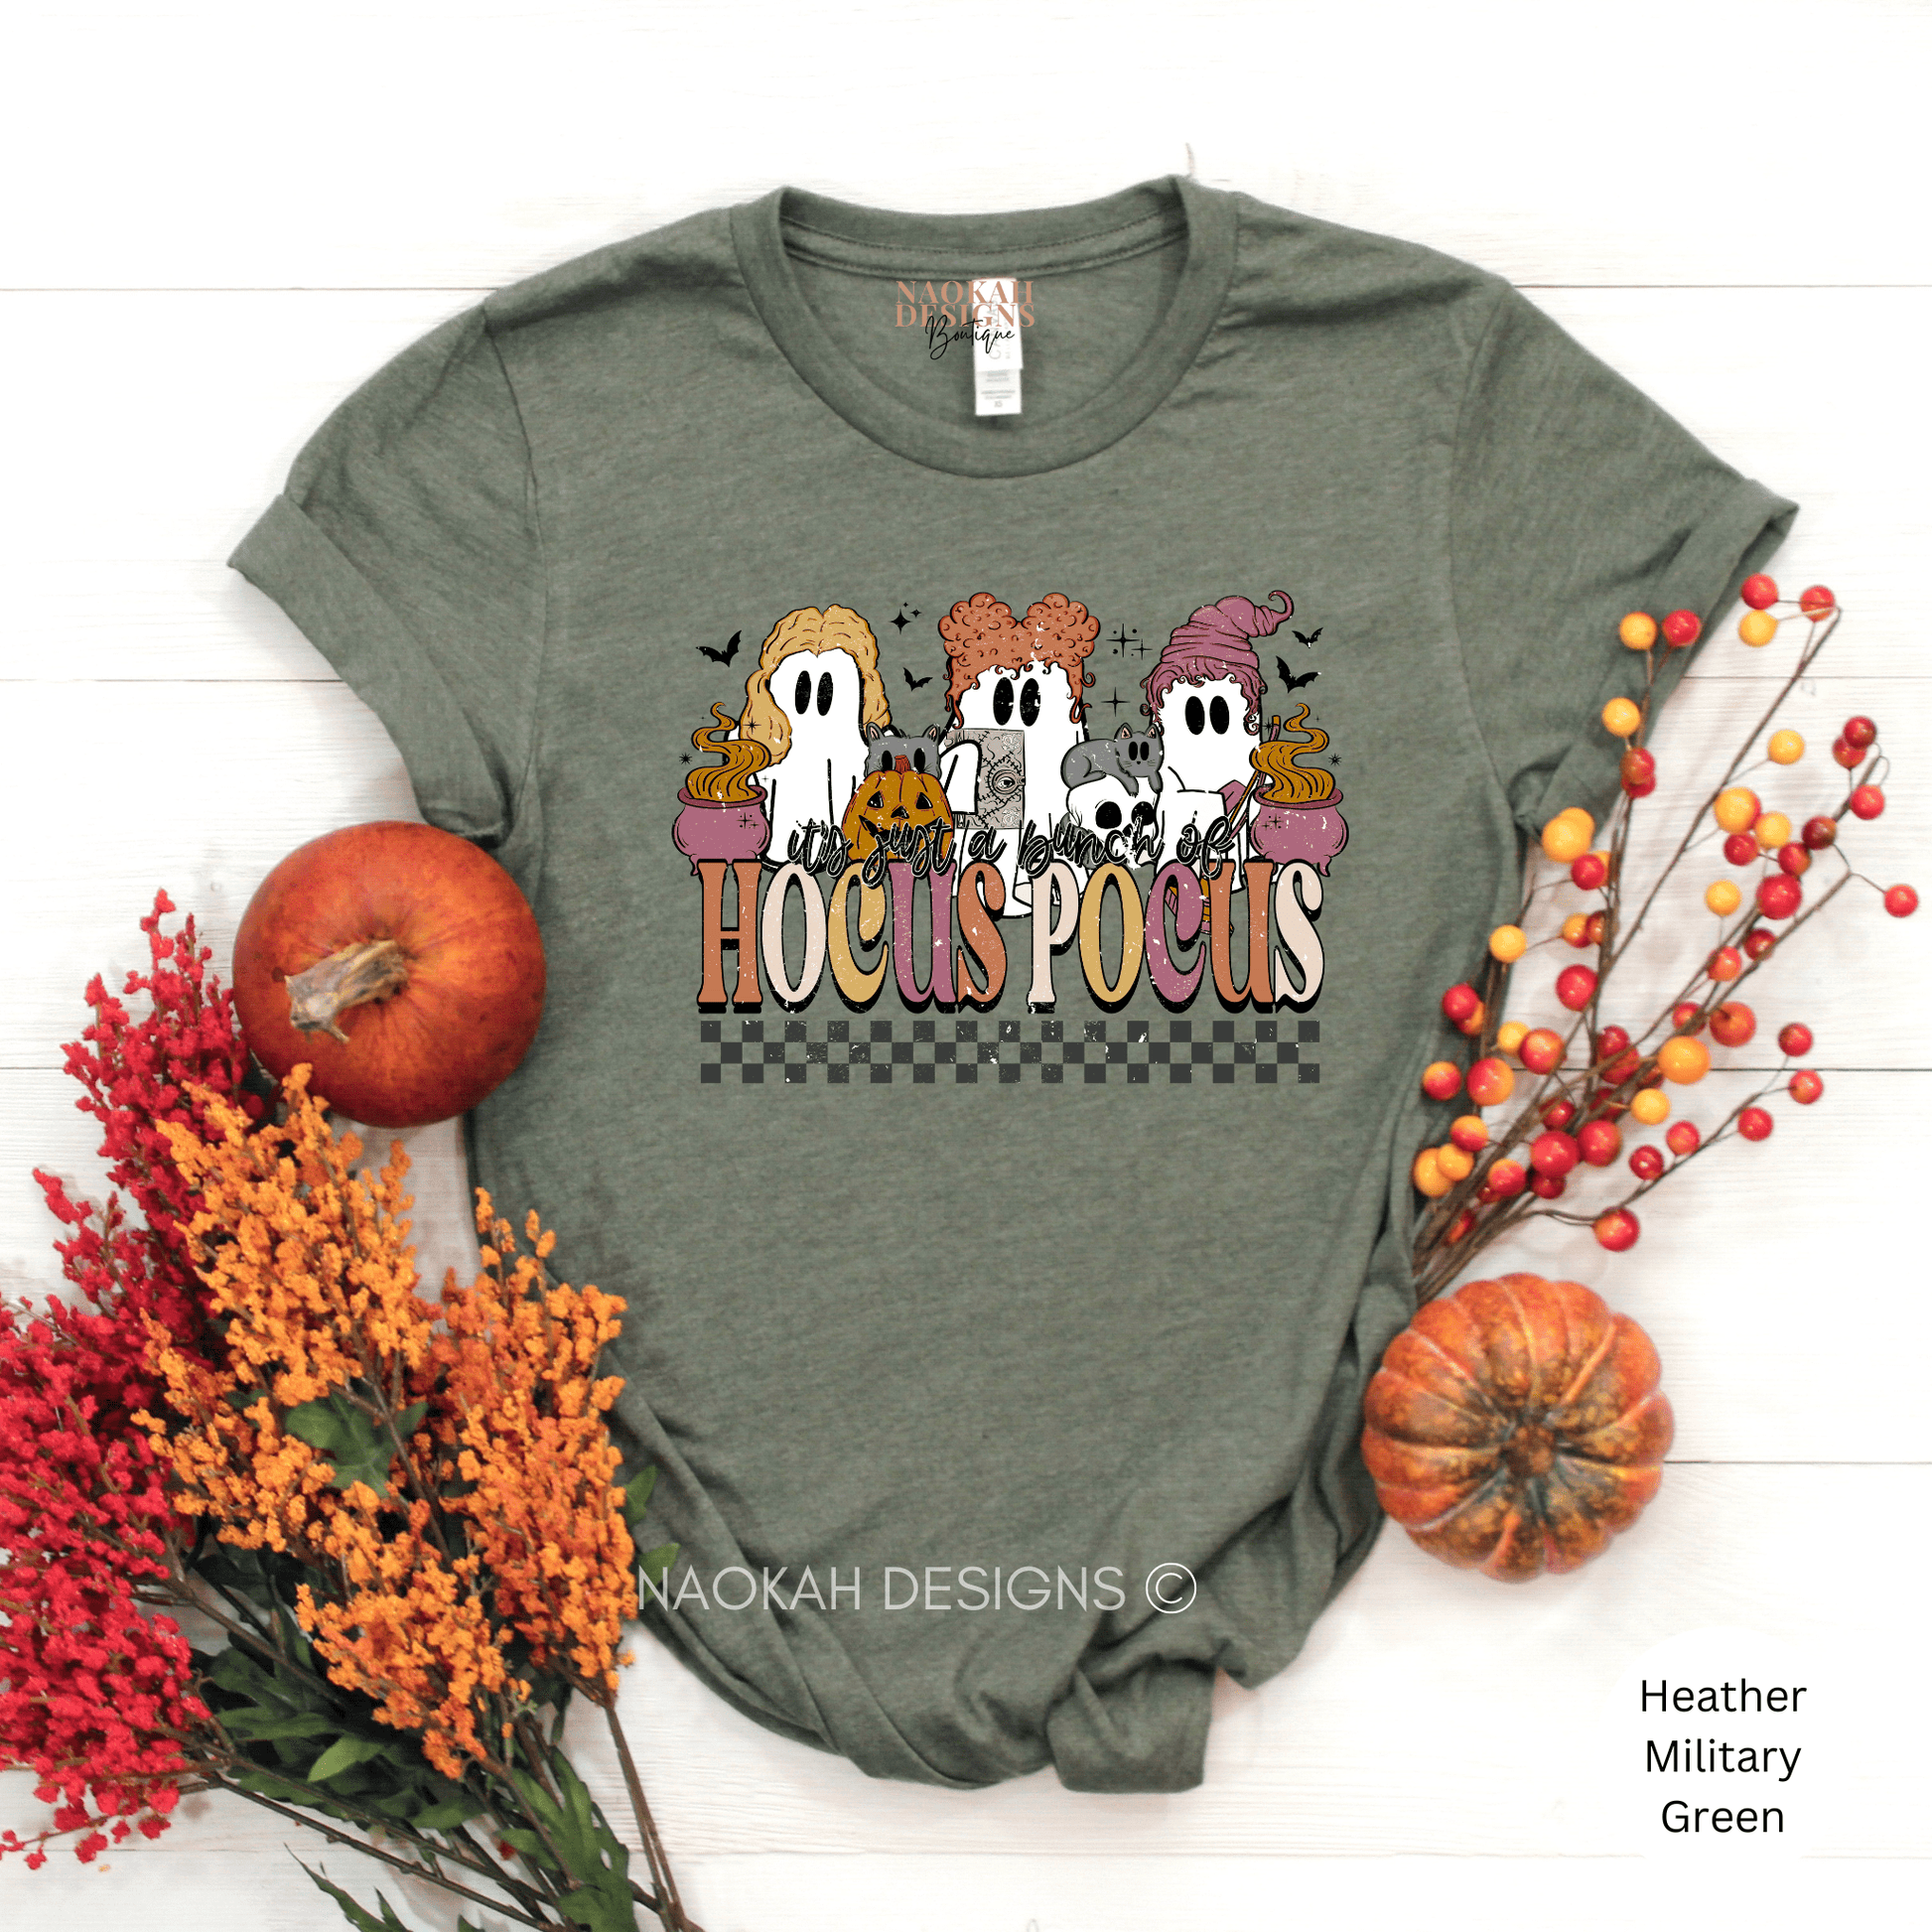 Hocus Pocus Shirt, Sanderson Sisters Shirt, Salem Witch Shirt, Support Your Local Witches Shirt, Halloween Witches Shirt, Come We Fly Tee 